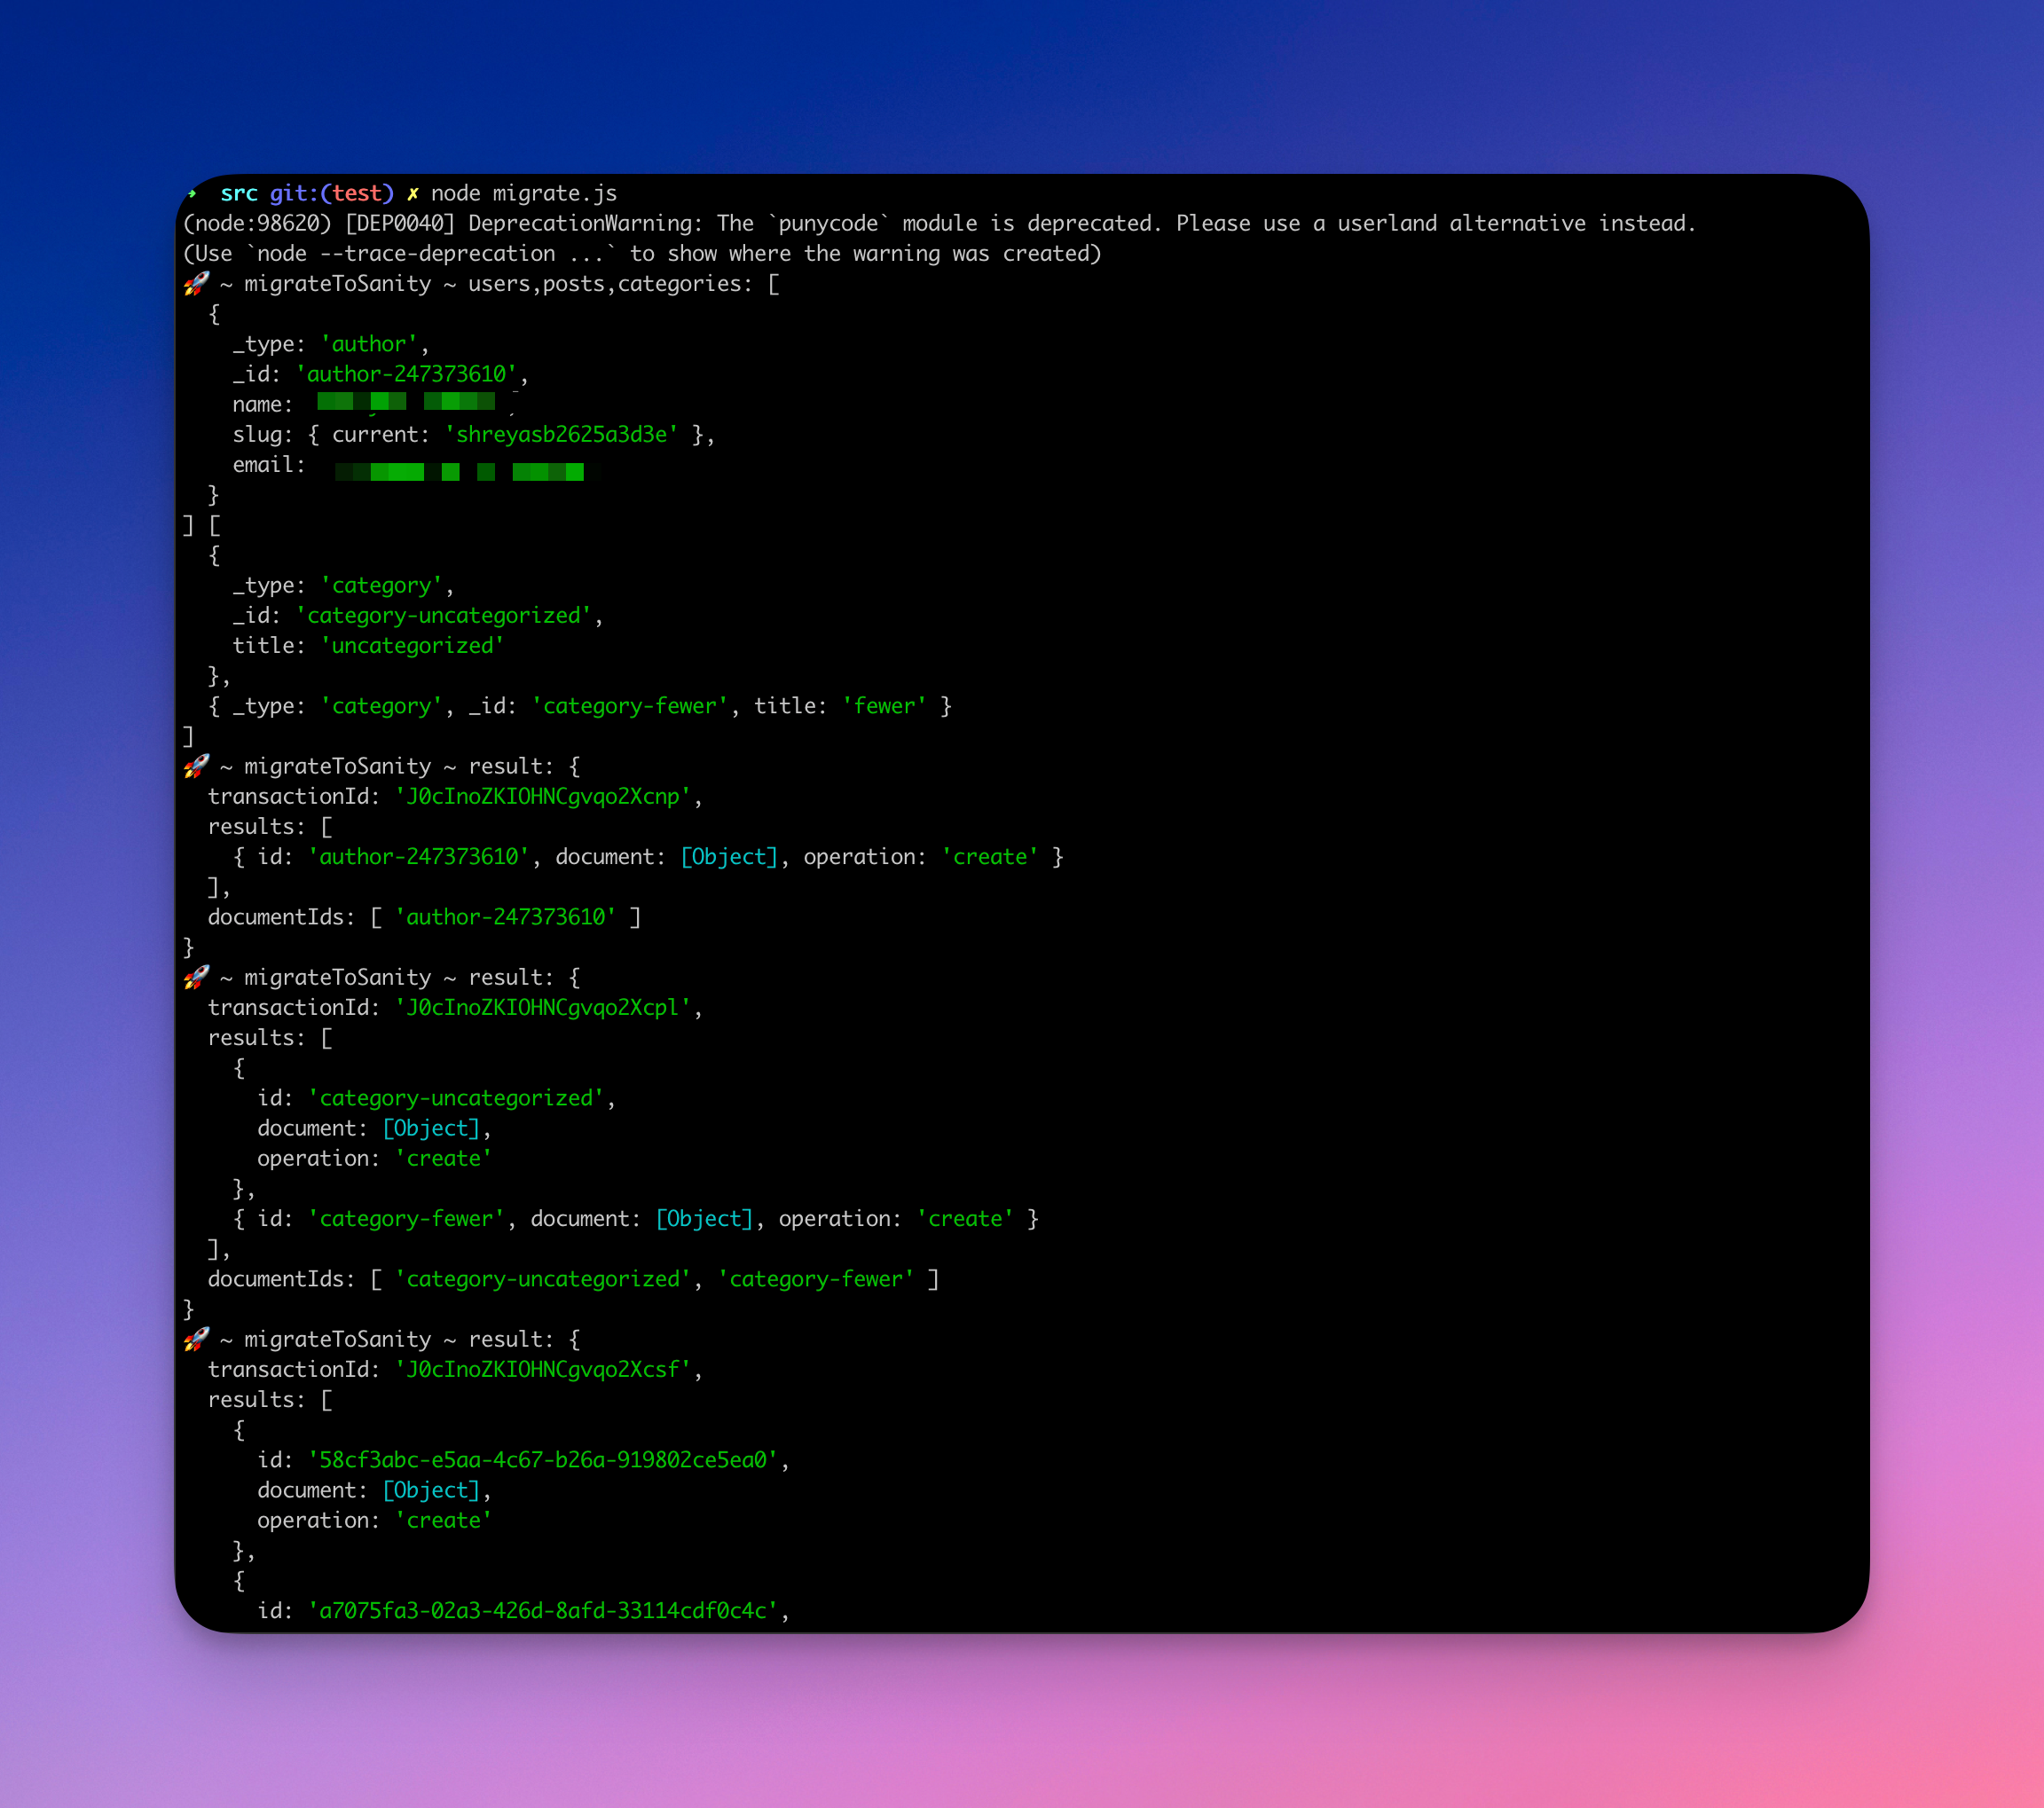 Terminal output of the script on some ugly-ass theme